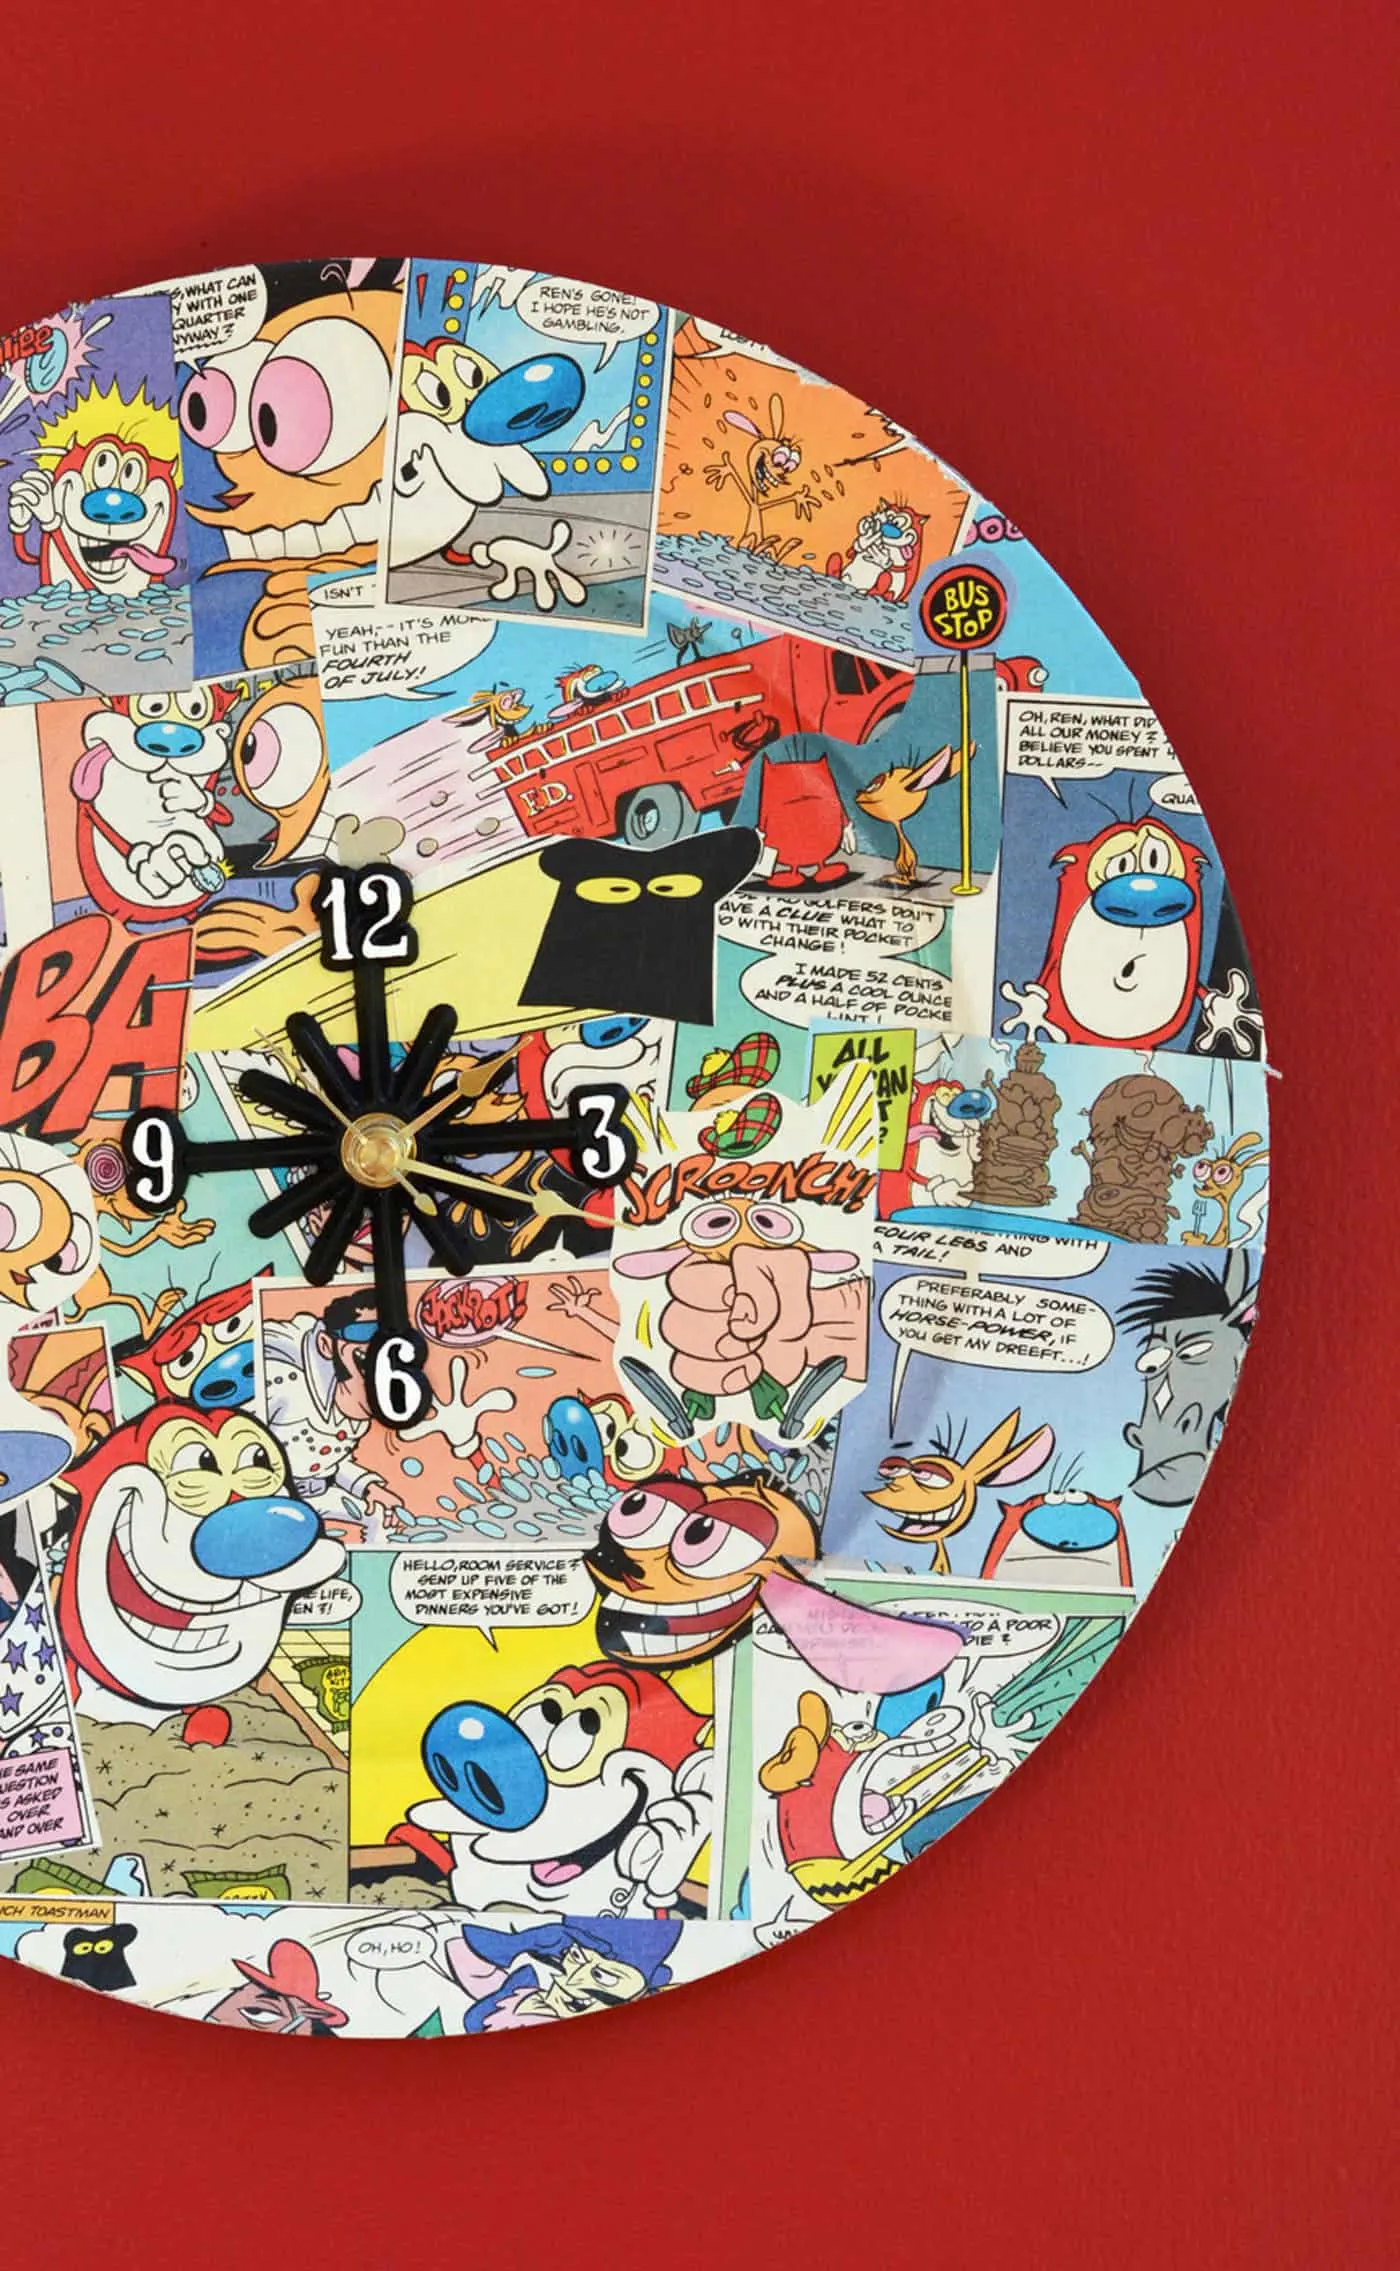 DIY clock made with comic book pages